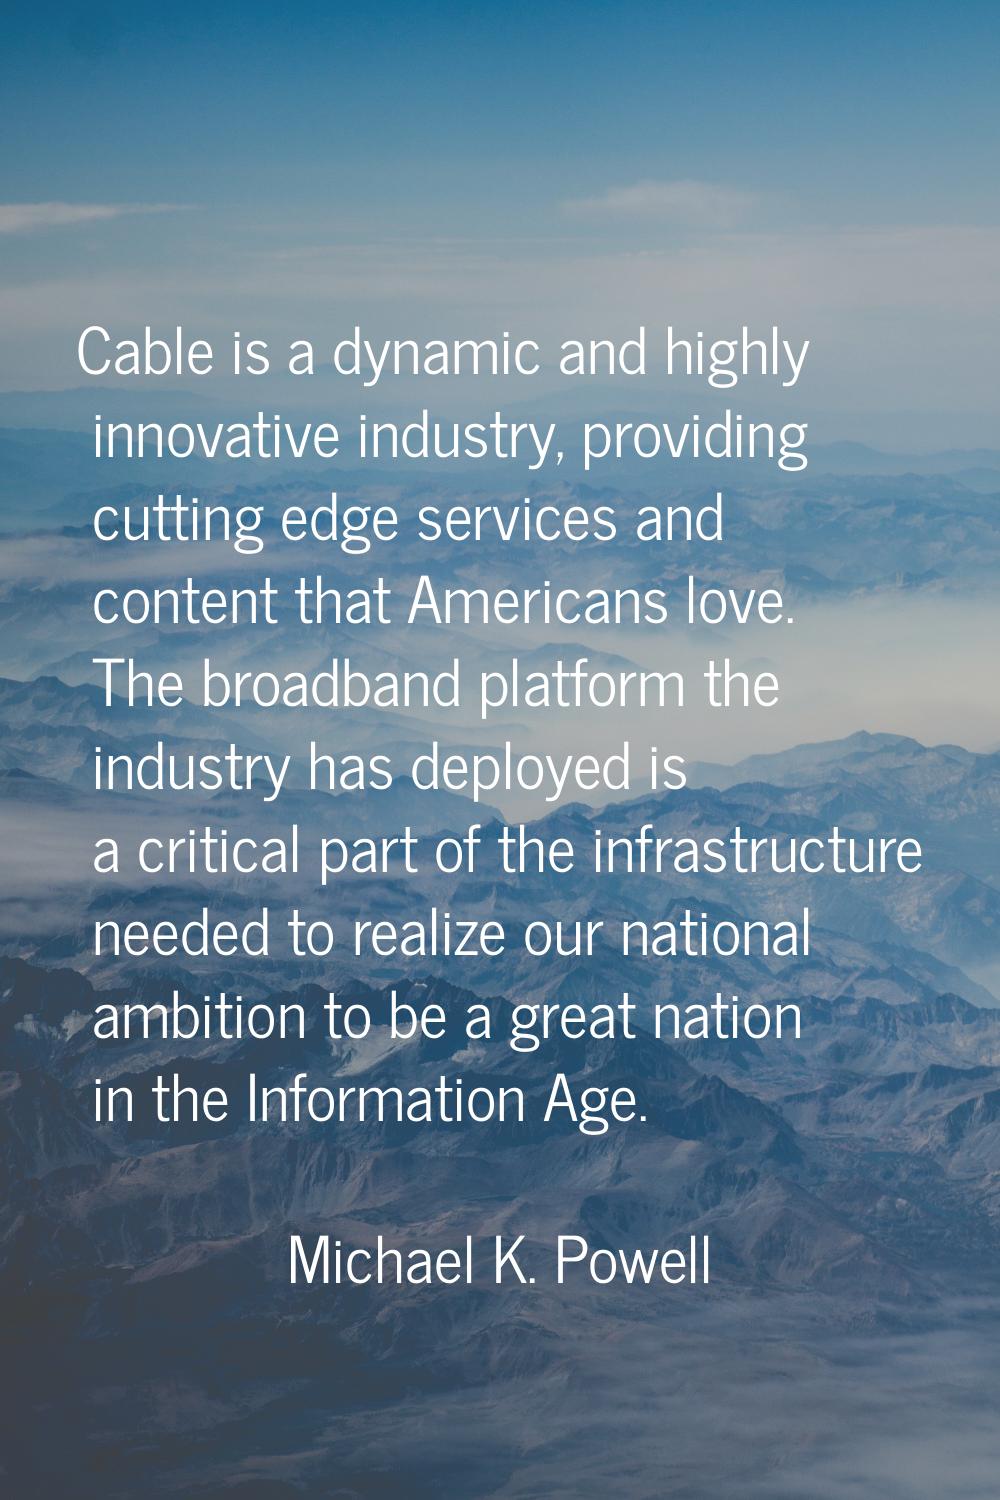 Cable is a dynamic and highly innovative industry, providing cutting edge services and content that